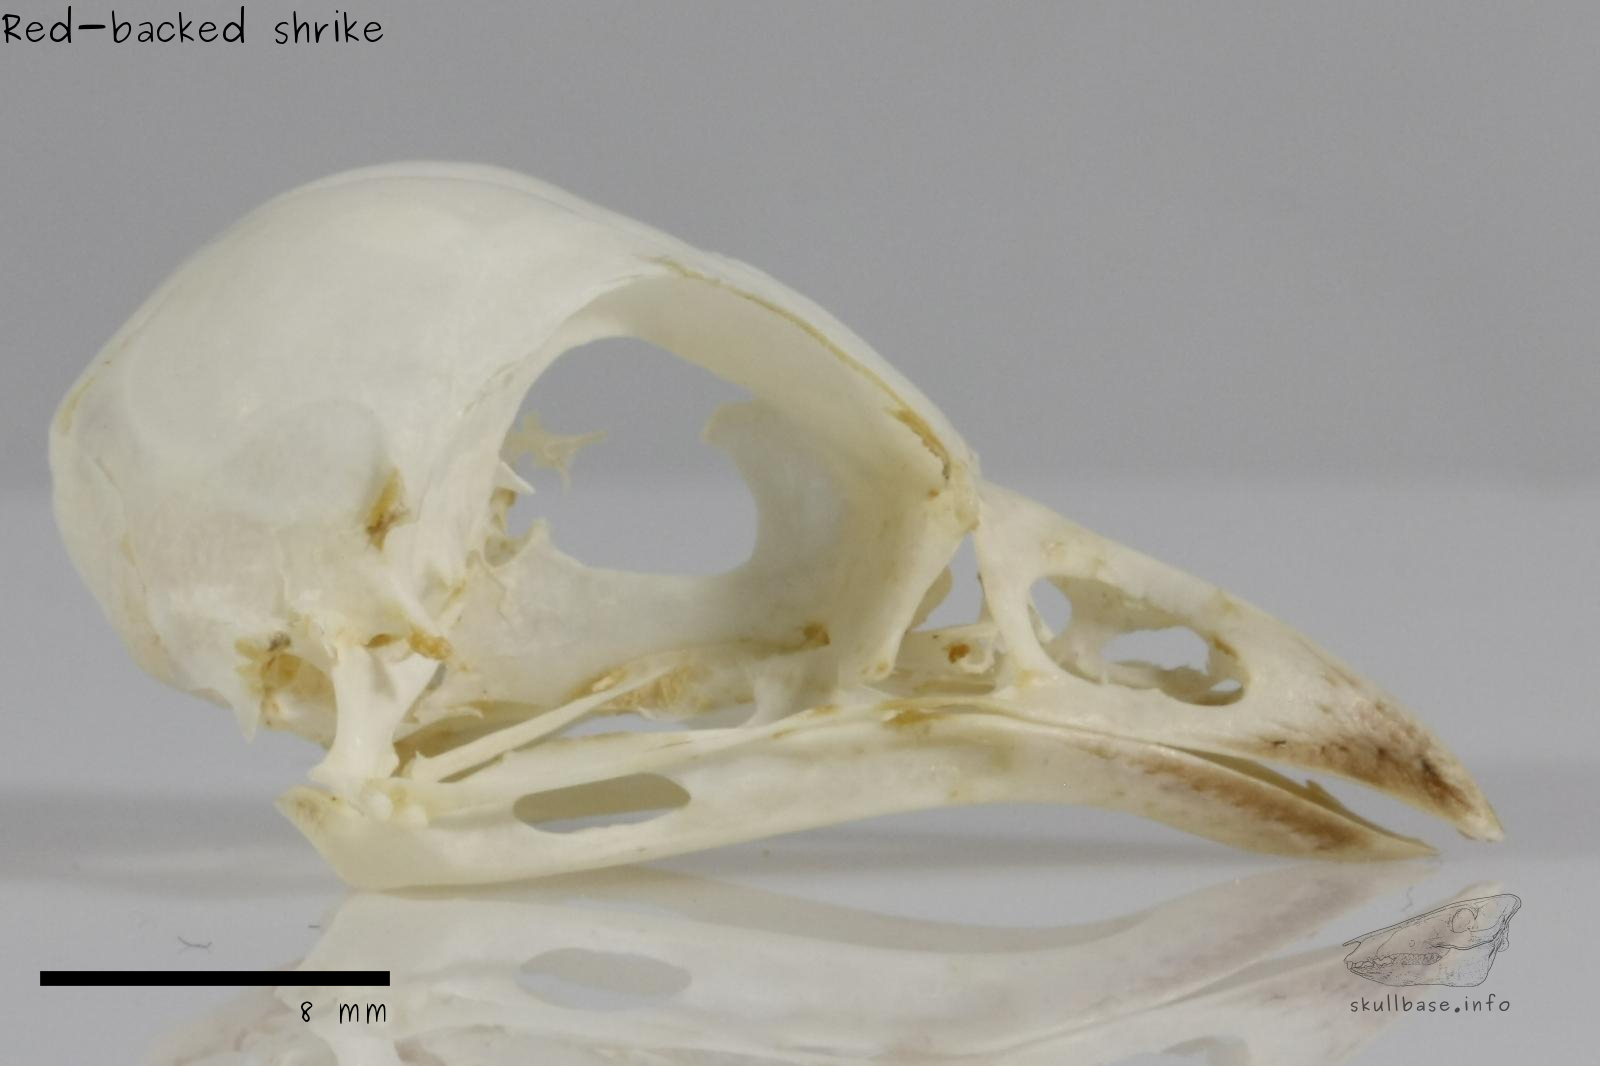 Red-backed shrike (Lanius collurio) skull lateral view